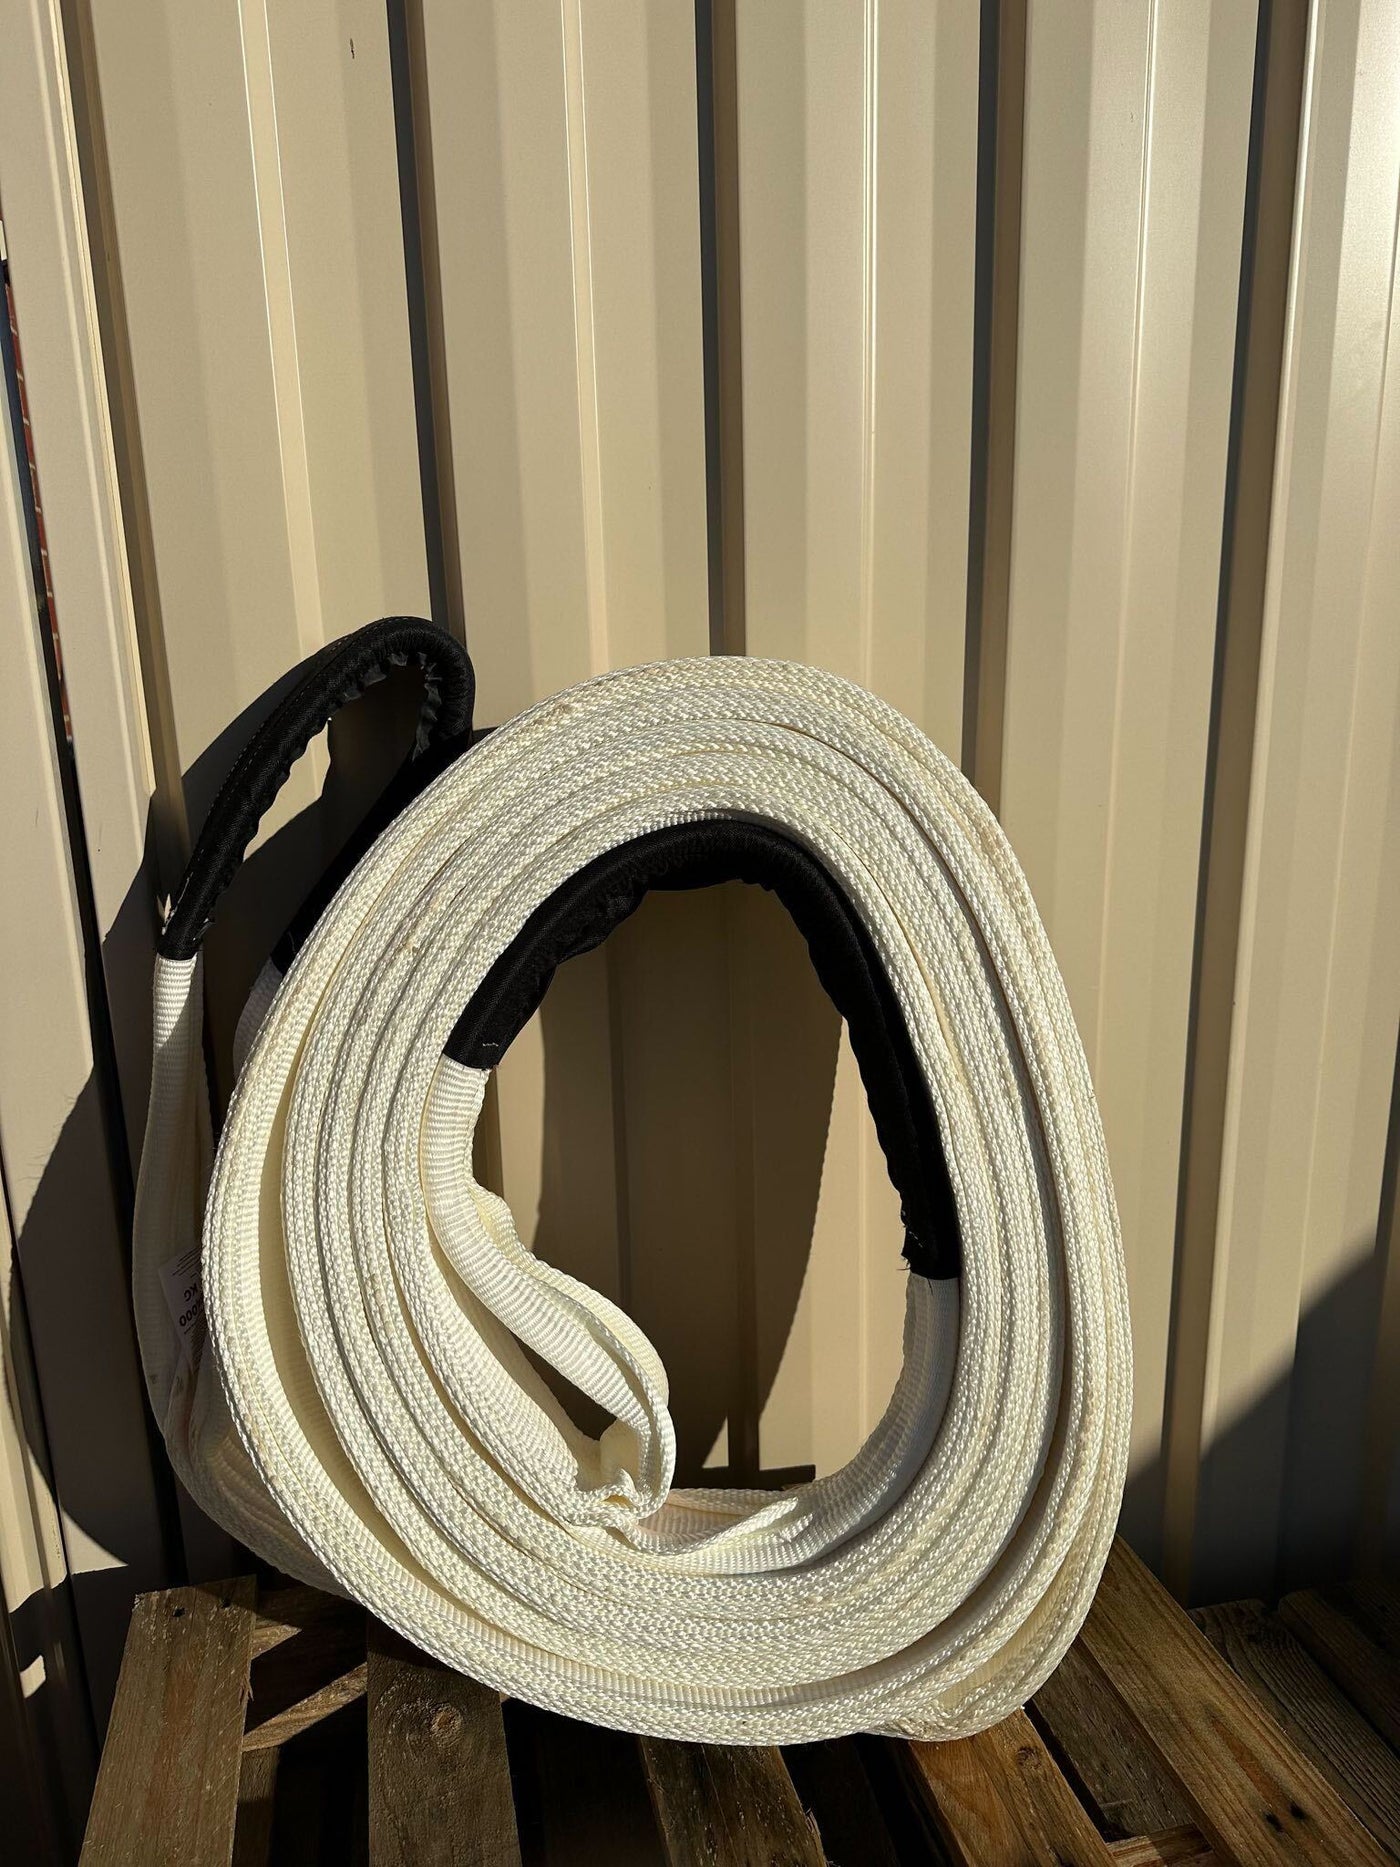 60 Tonne Snatch Straps - High Strength Nylon Webbing - Safe & Effective Towing Solution